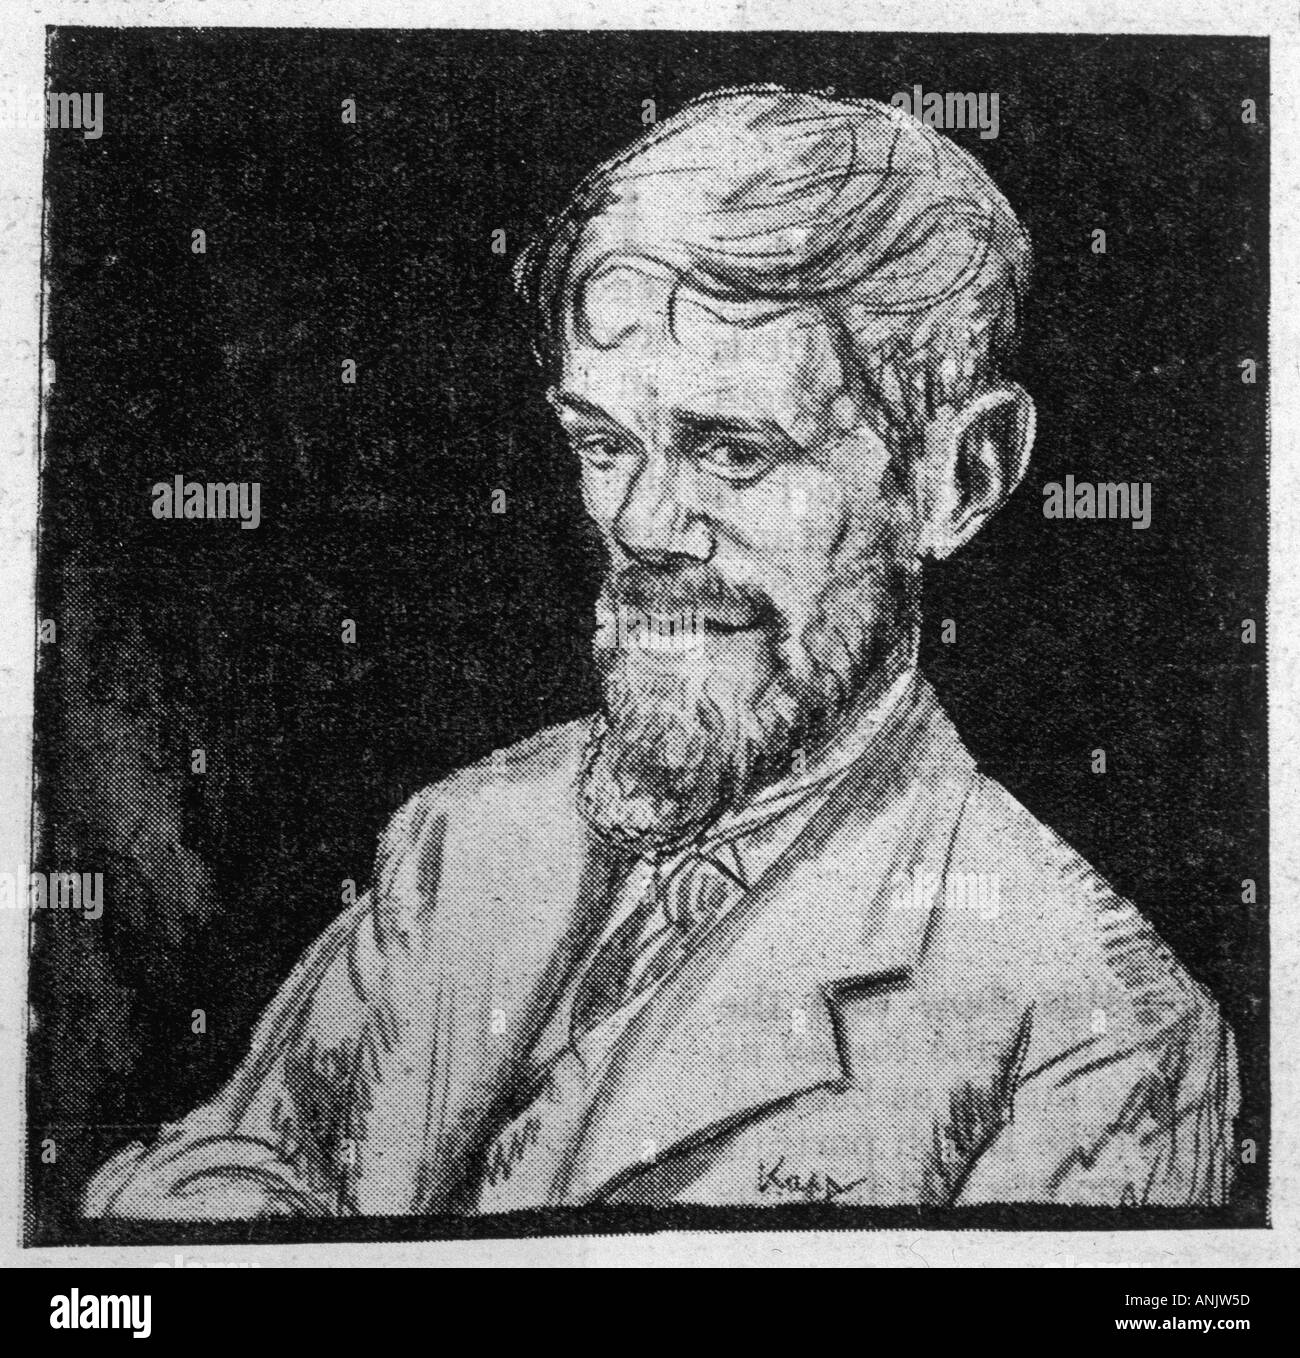 D H Lawrence Sketch Stock Photo